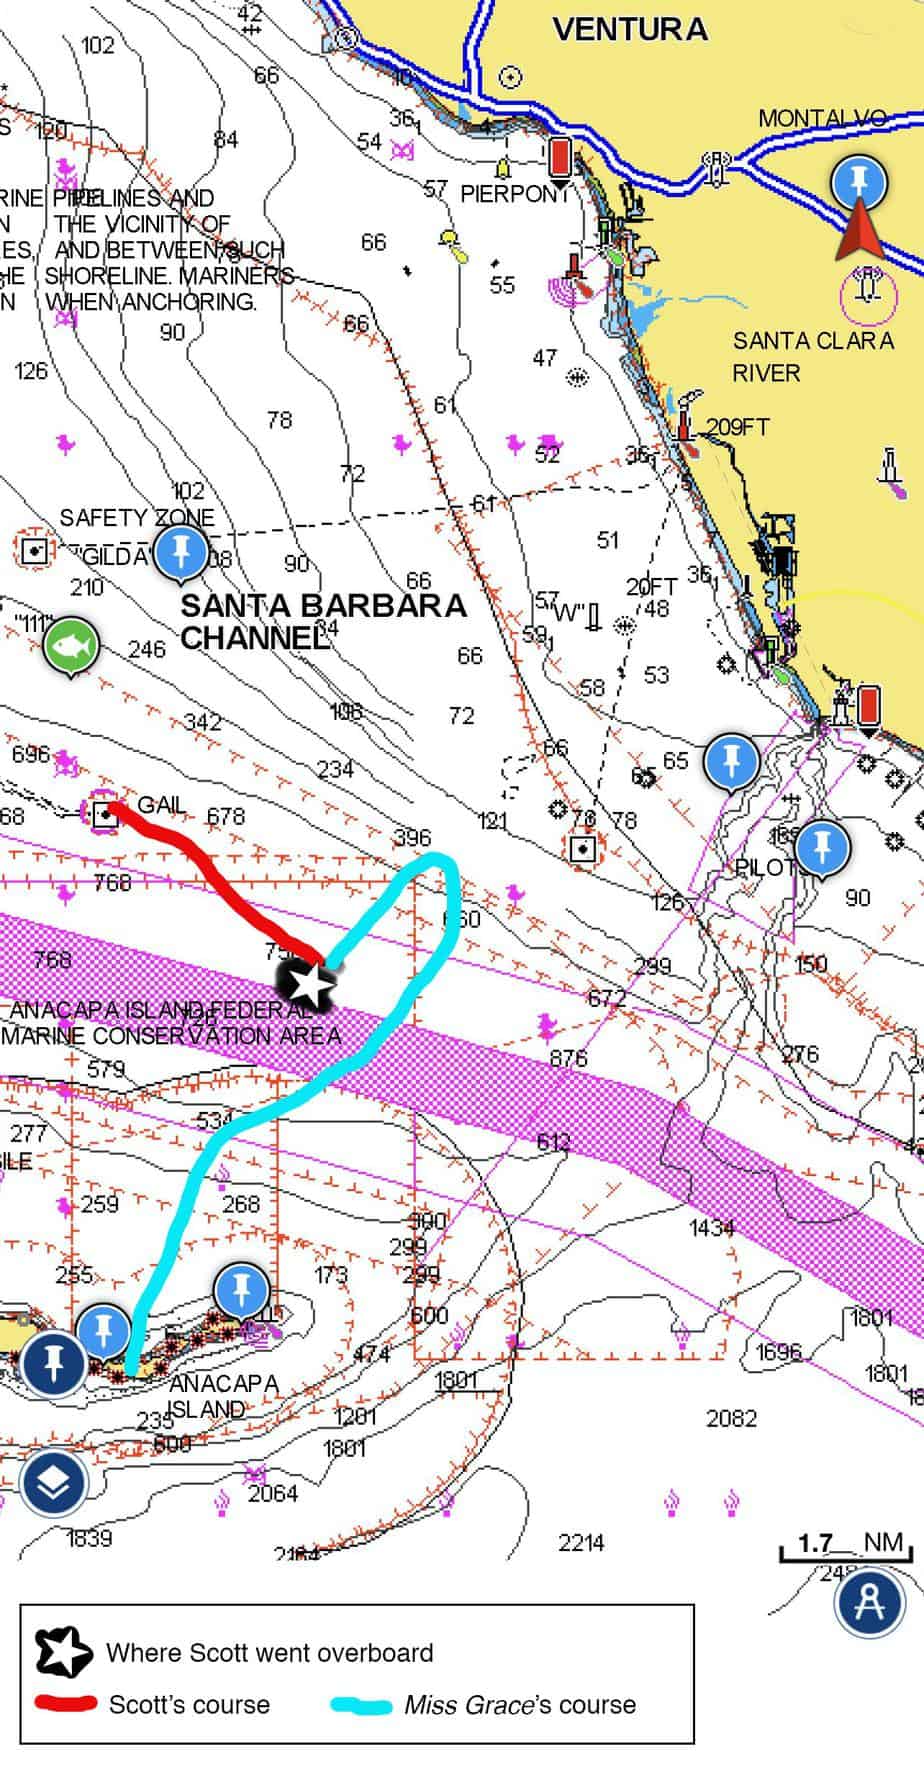 A map of the Santa Barbara Channel